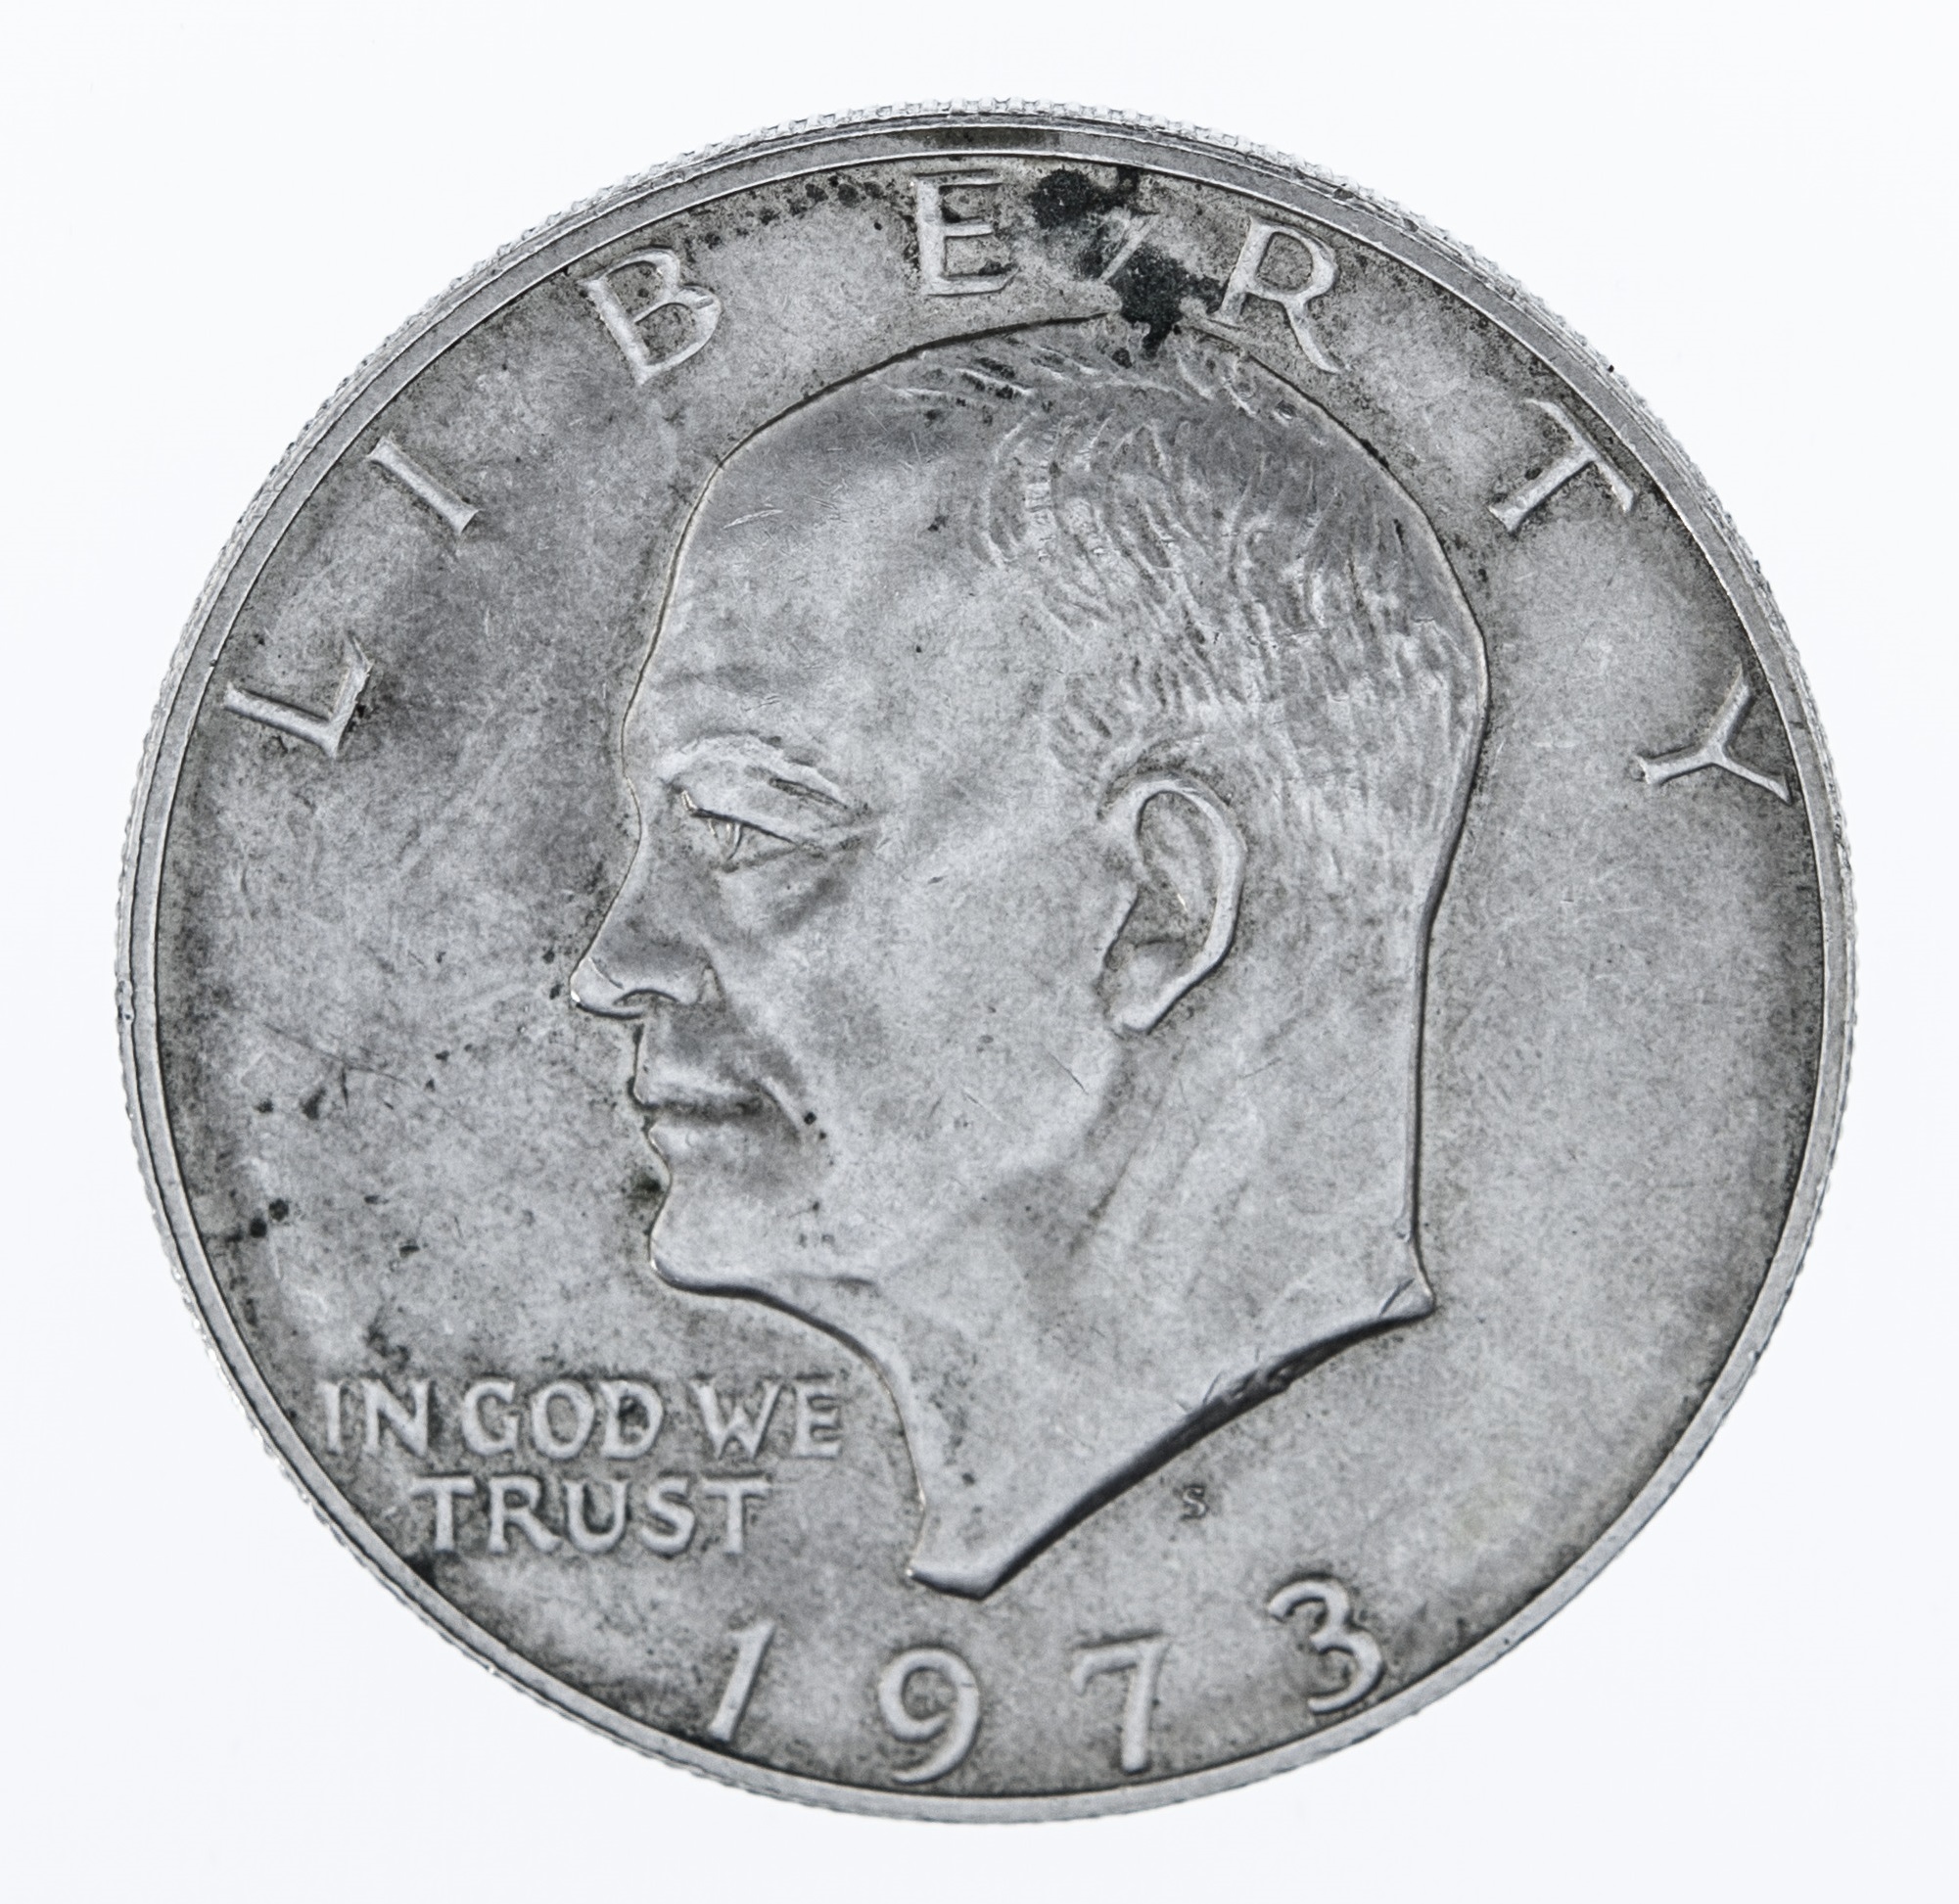 "Tricky Ikes" - The Story of the Silver Eisenhower Dollar